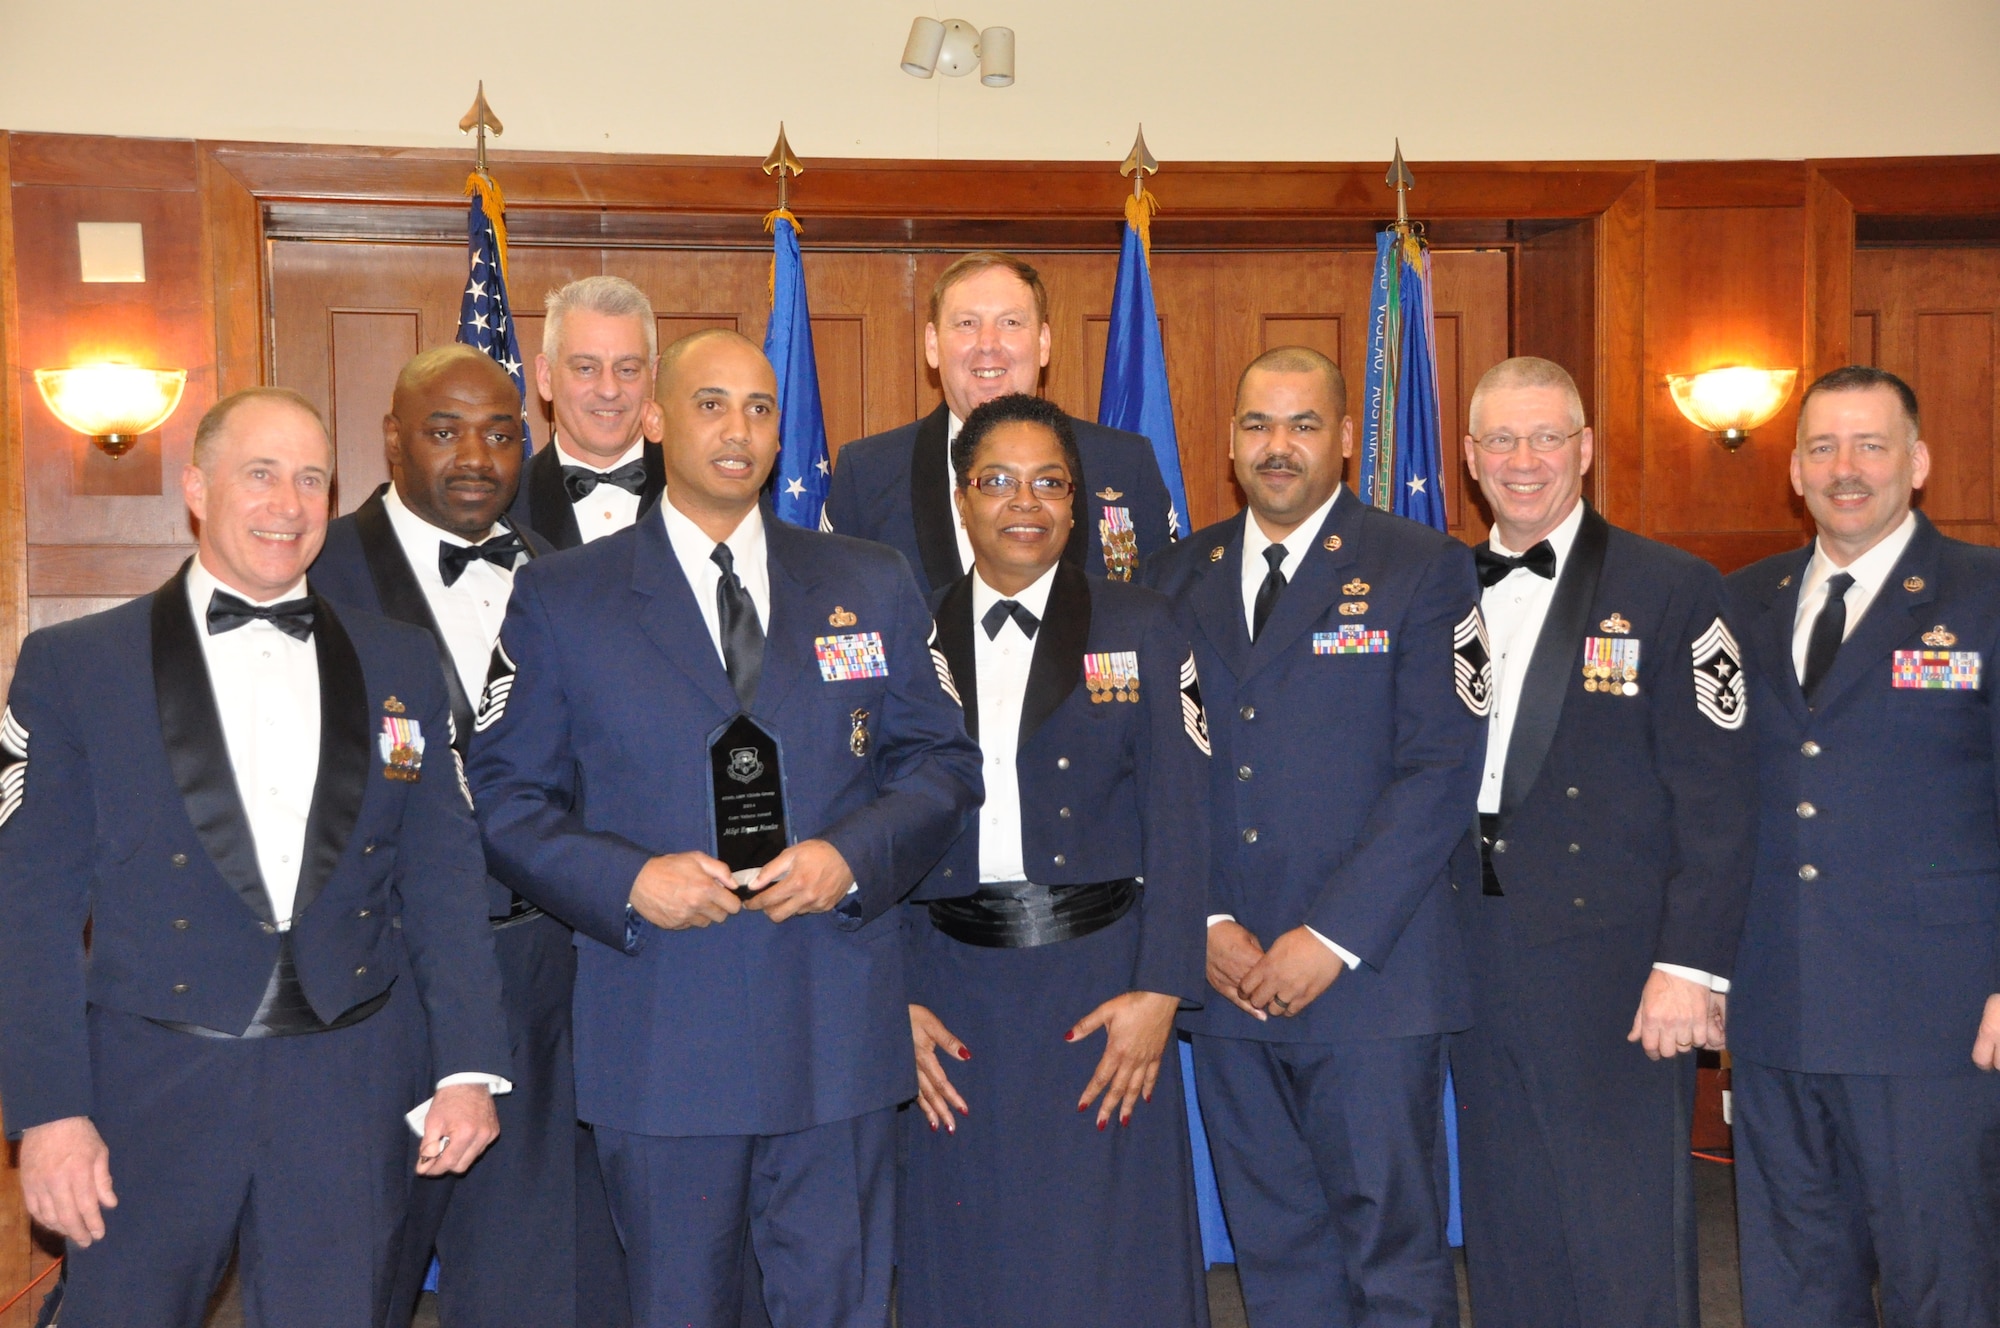 Master Sgt. Bryant Hamlor, 459th Security Forces Squadron, wins the 459th Chief's Group Core Values Award at the 459 ARW Annual Awards Banquet on Saturday, March 7, 2015. He is flanked by members of the 459th Chief's Group. (Air Force Photo / SrA Kristin Kurtz)
